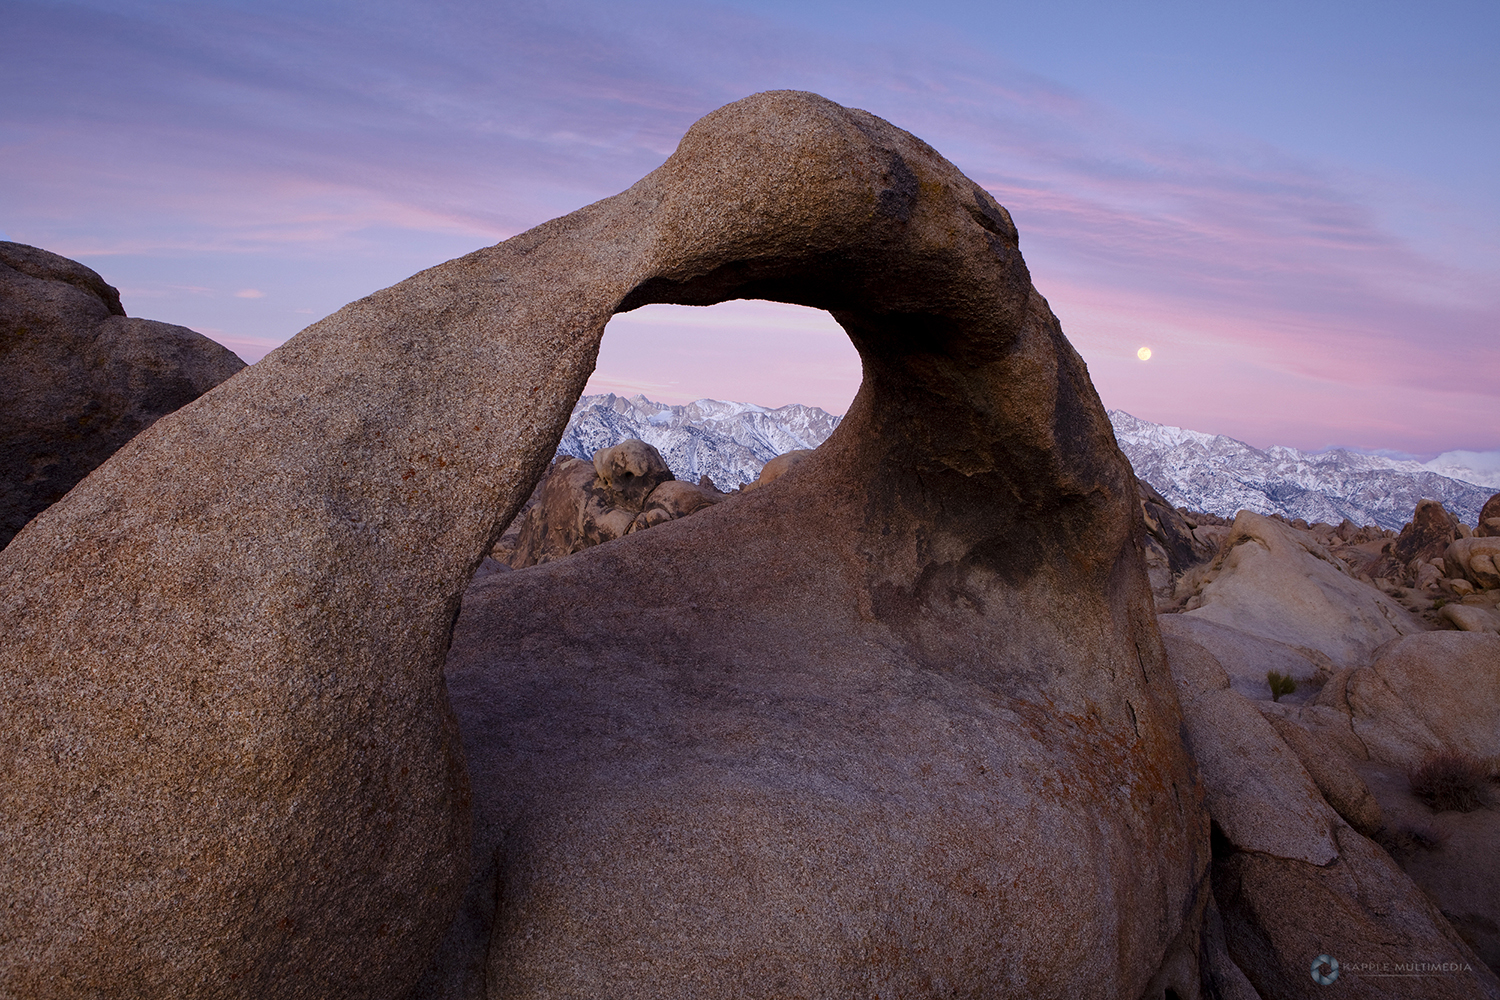 Sunrise at Mobius Arch in the Alabama Hills with the Sierras in the background. Alabama Hills, Lone Pine, California, USA.